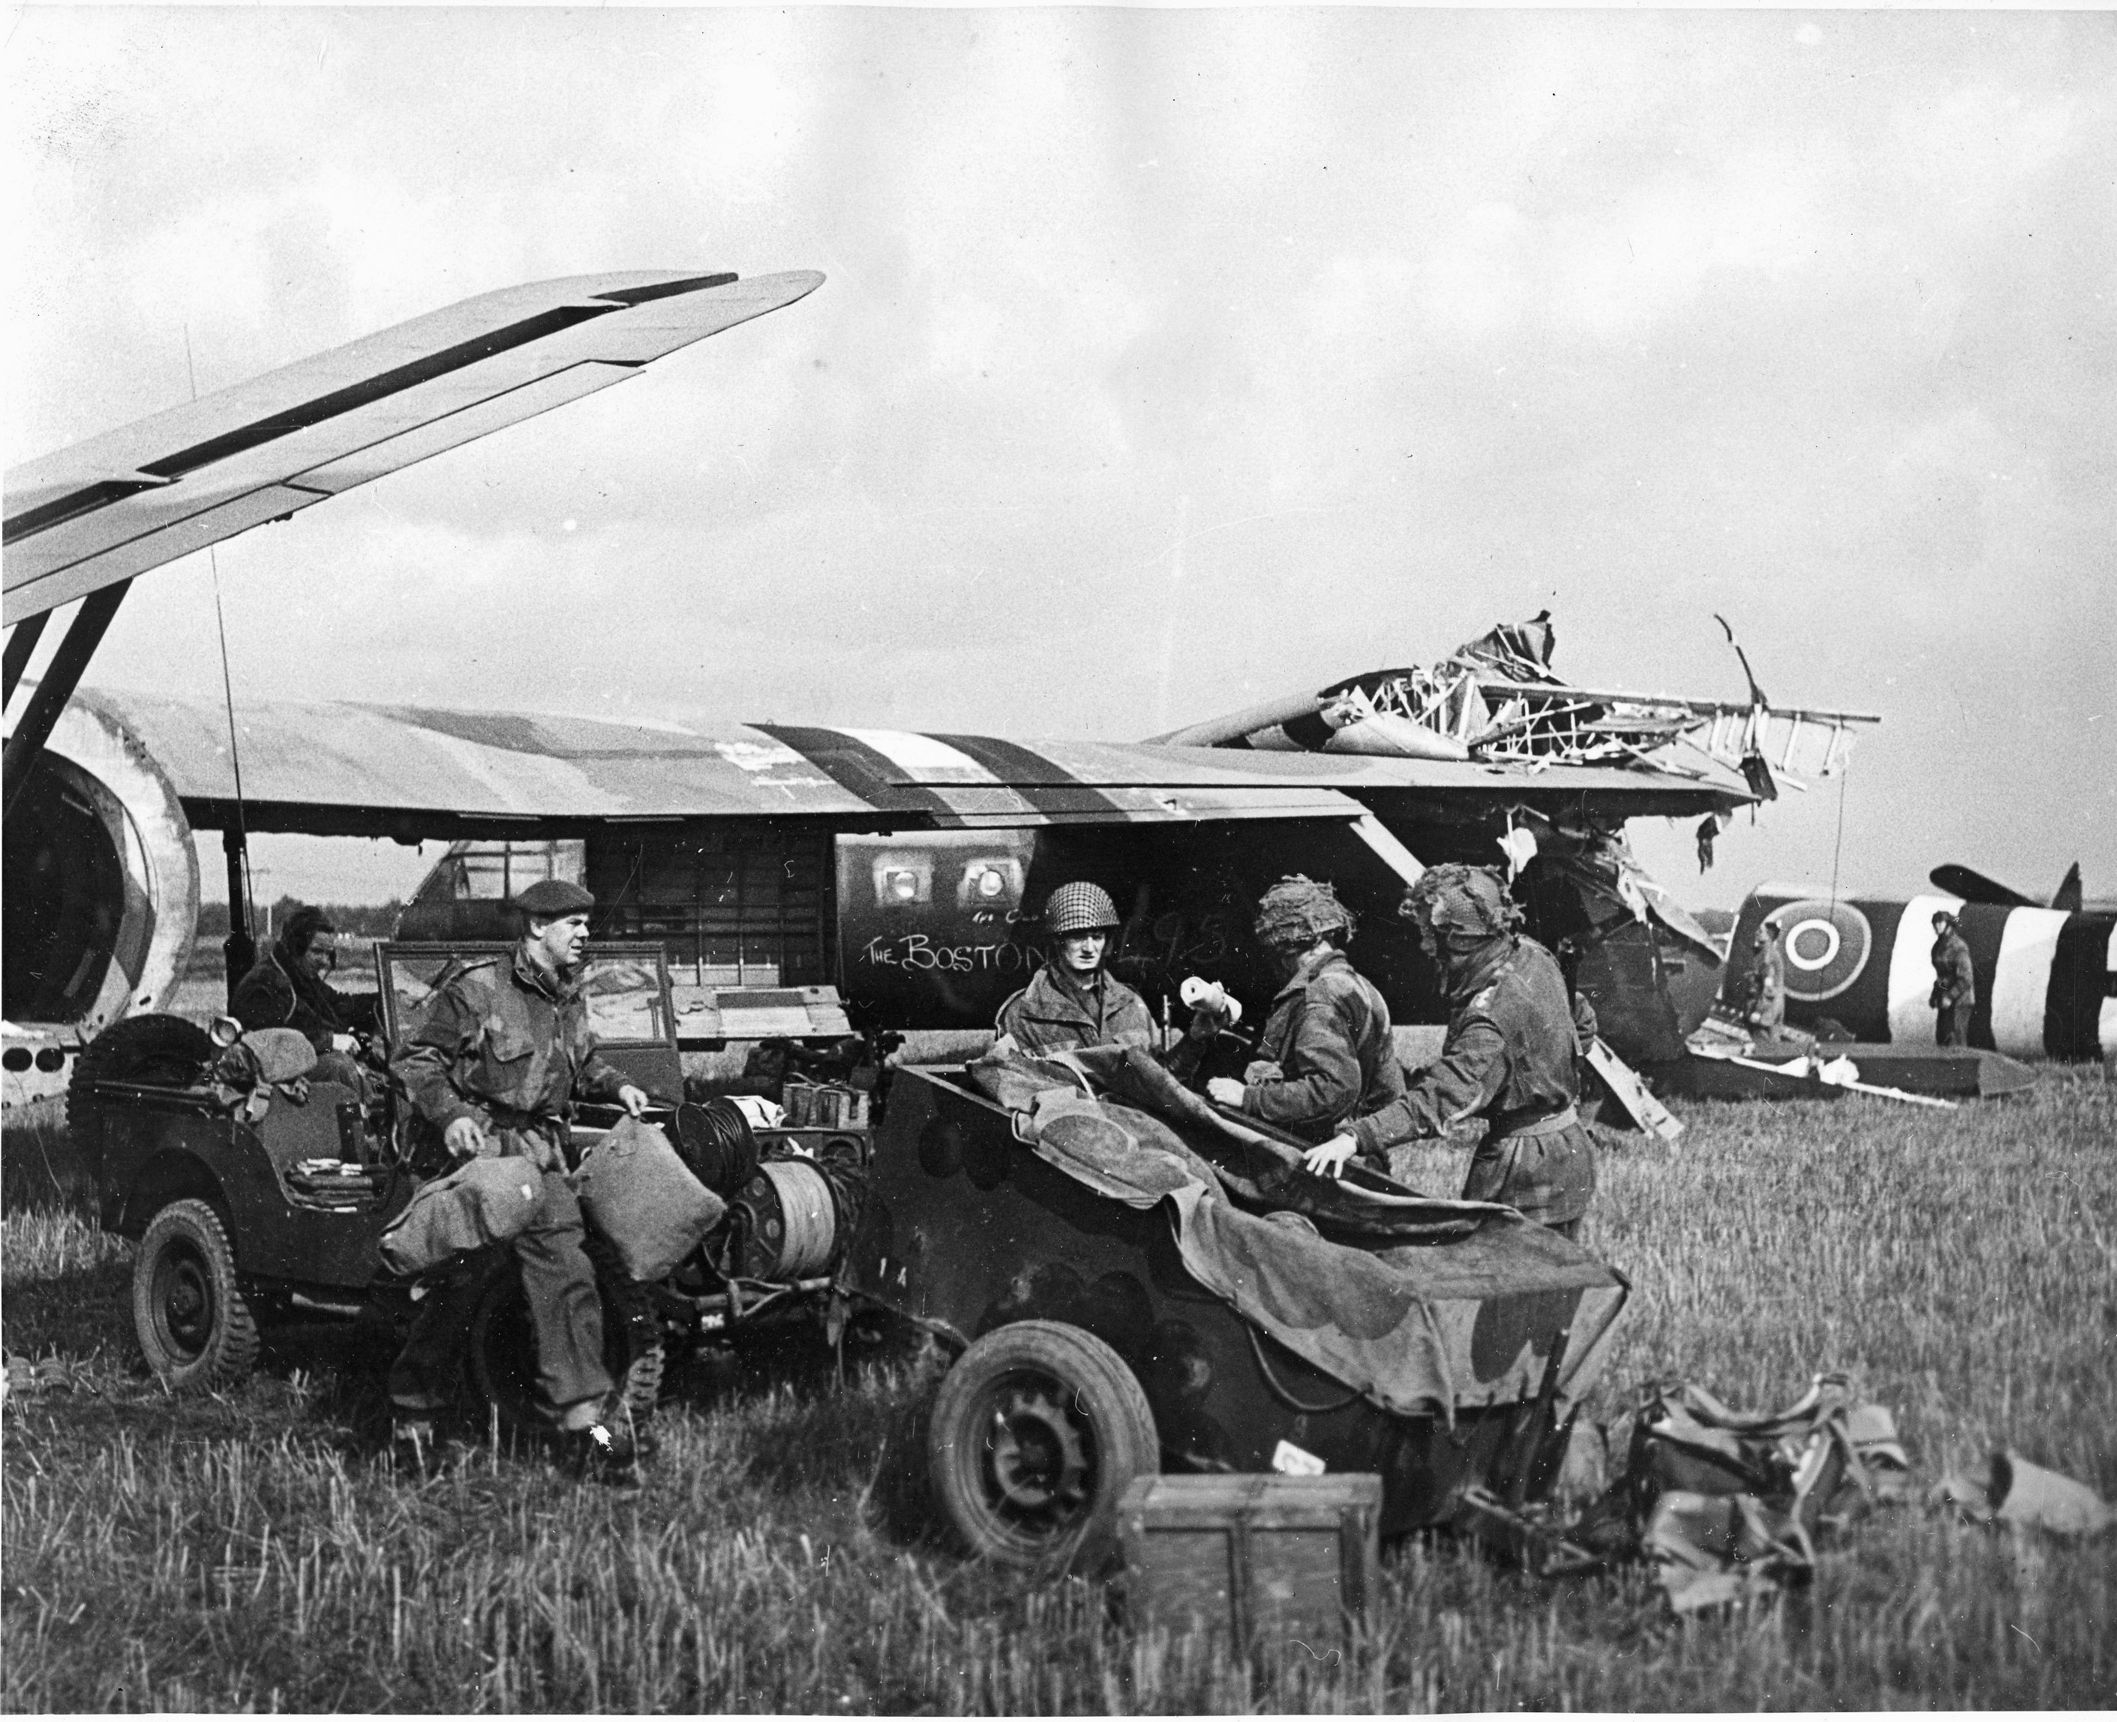 Two of the first British gliders to touch down in Holland during Operation Market-Garden carried jeeps and trailers. Although these gliders were damaged when they brushed wings, the initial airborne phase of ill-fated Market-Garden was successful.